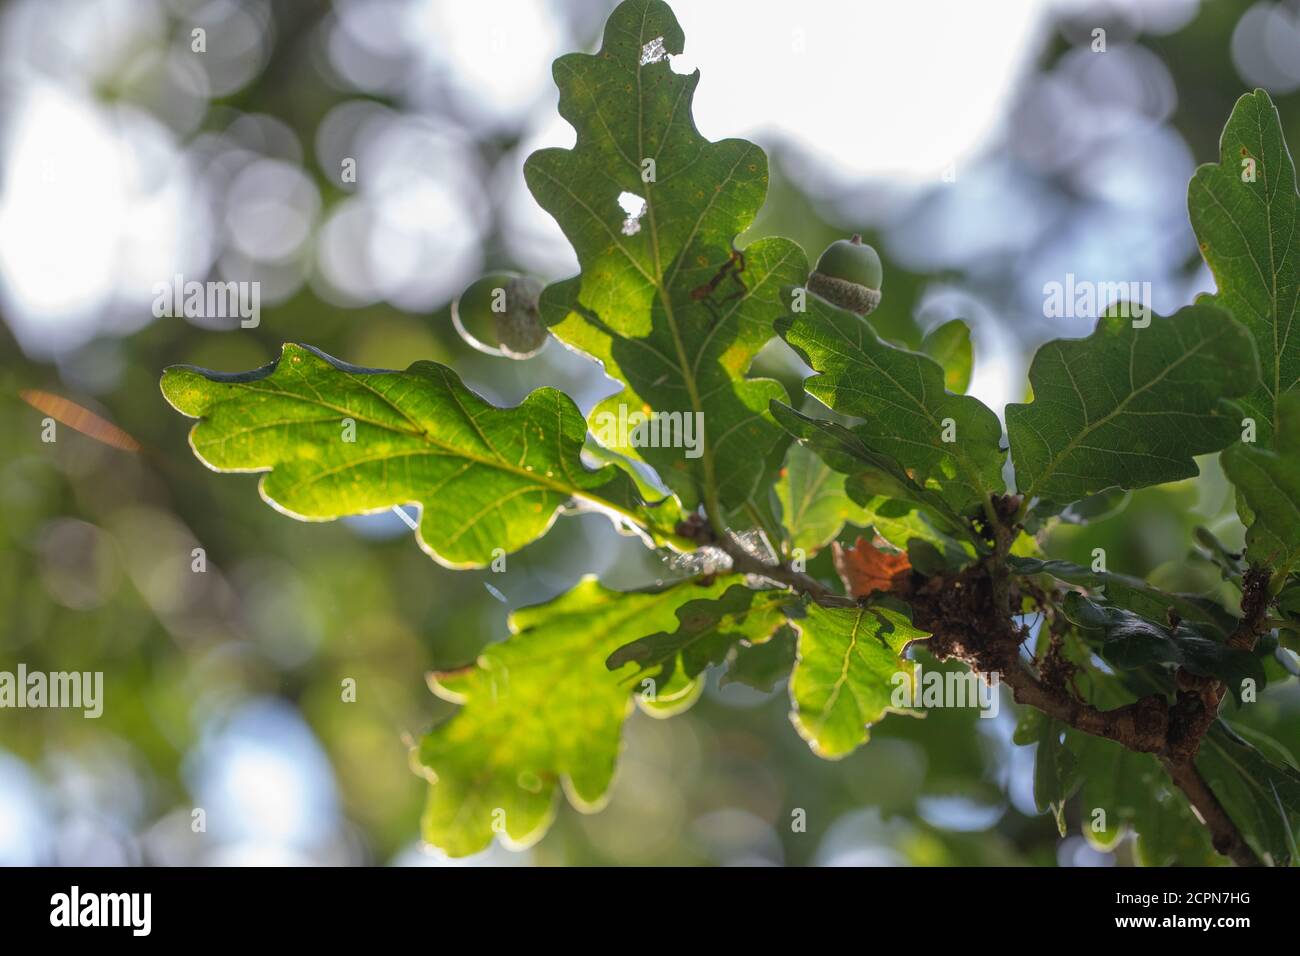 Leaves, foliage and Acorns. Fruits of the English Oak Tree (Quercus robur). Viewed from below, looking up through branches to the sky, contre jour lig Stock Photo